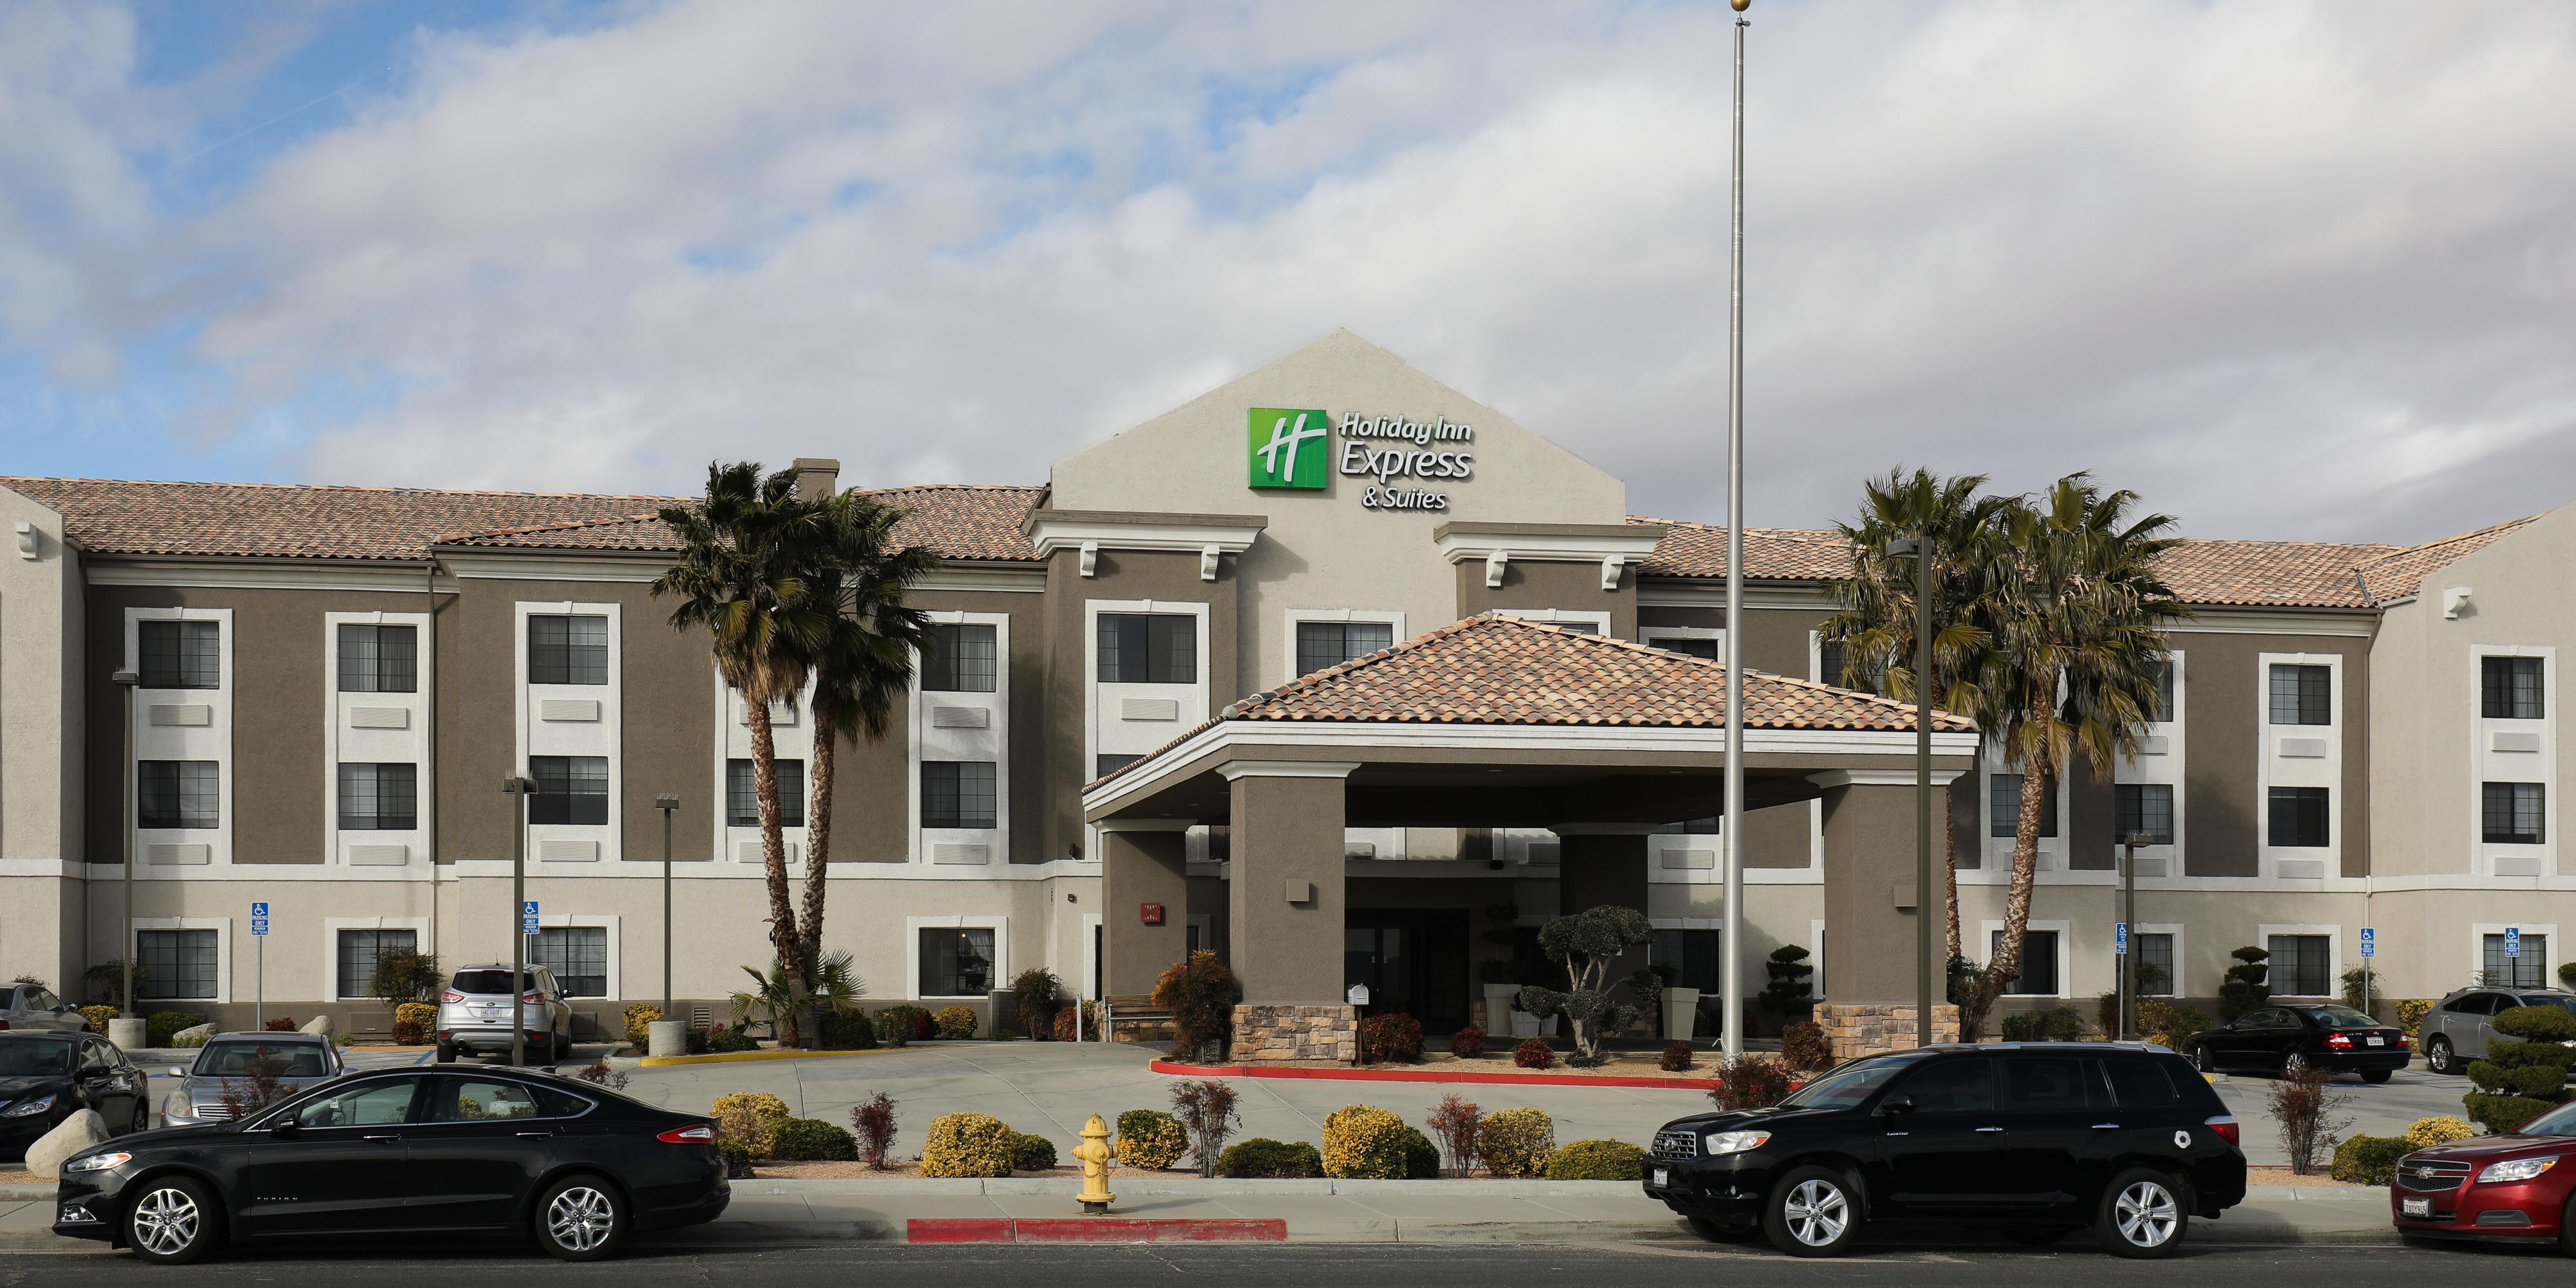 Our hotel is conveniently located near Kaiser Permanente, Desert Valley Hospital and Medical Group, St Mary High Desert Medical Group, Friendly Medical Center, Radiant Primary Care, and several others. Whether traveling for an appointment or conducting business. We are here for you!